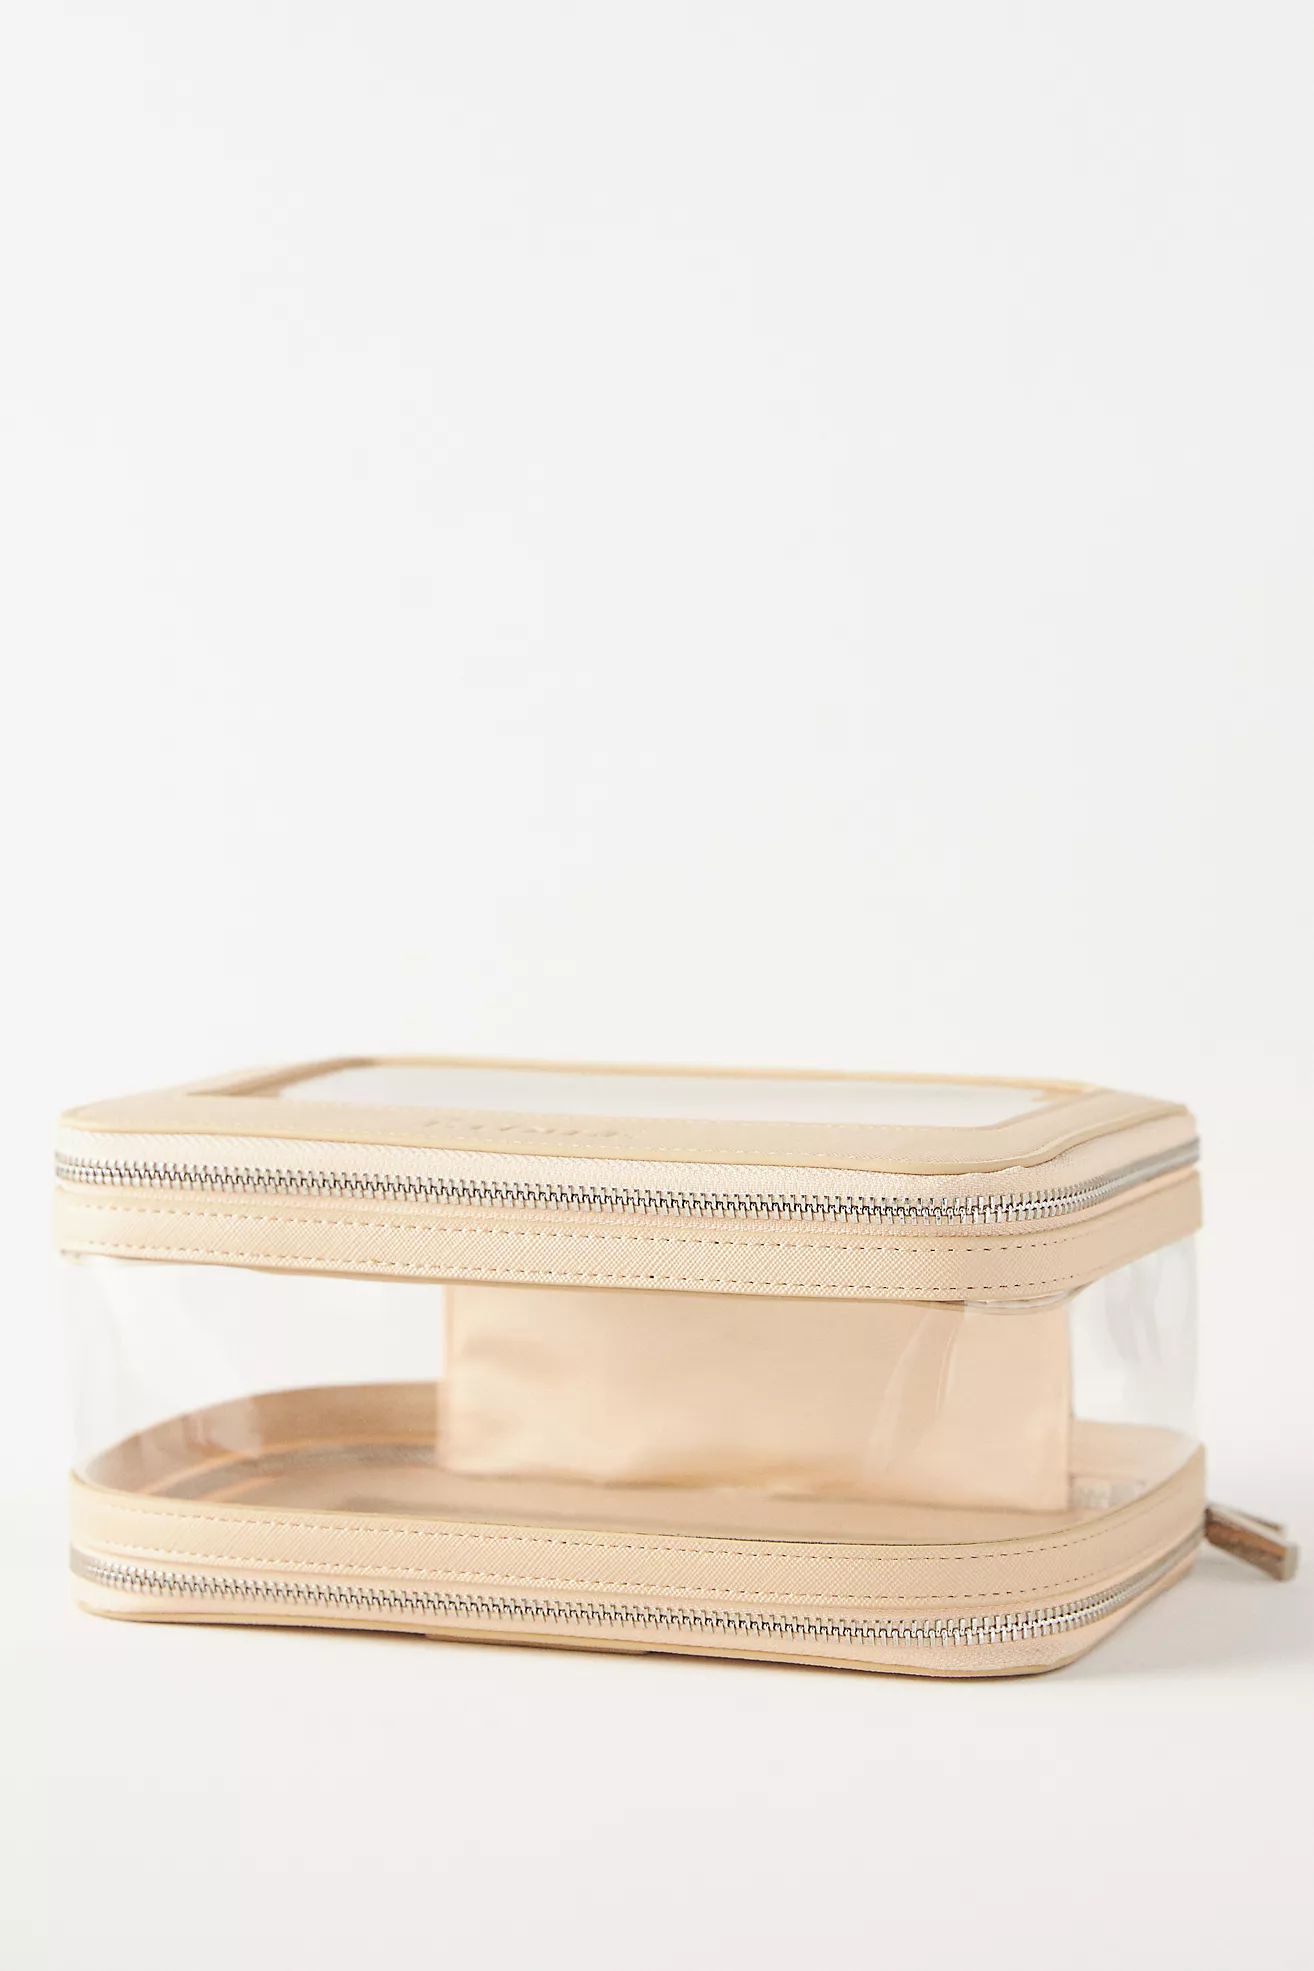 ETOILE Collective Clear Makeup Travel Case | Anthropologie (US)